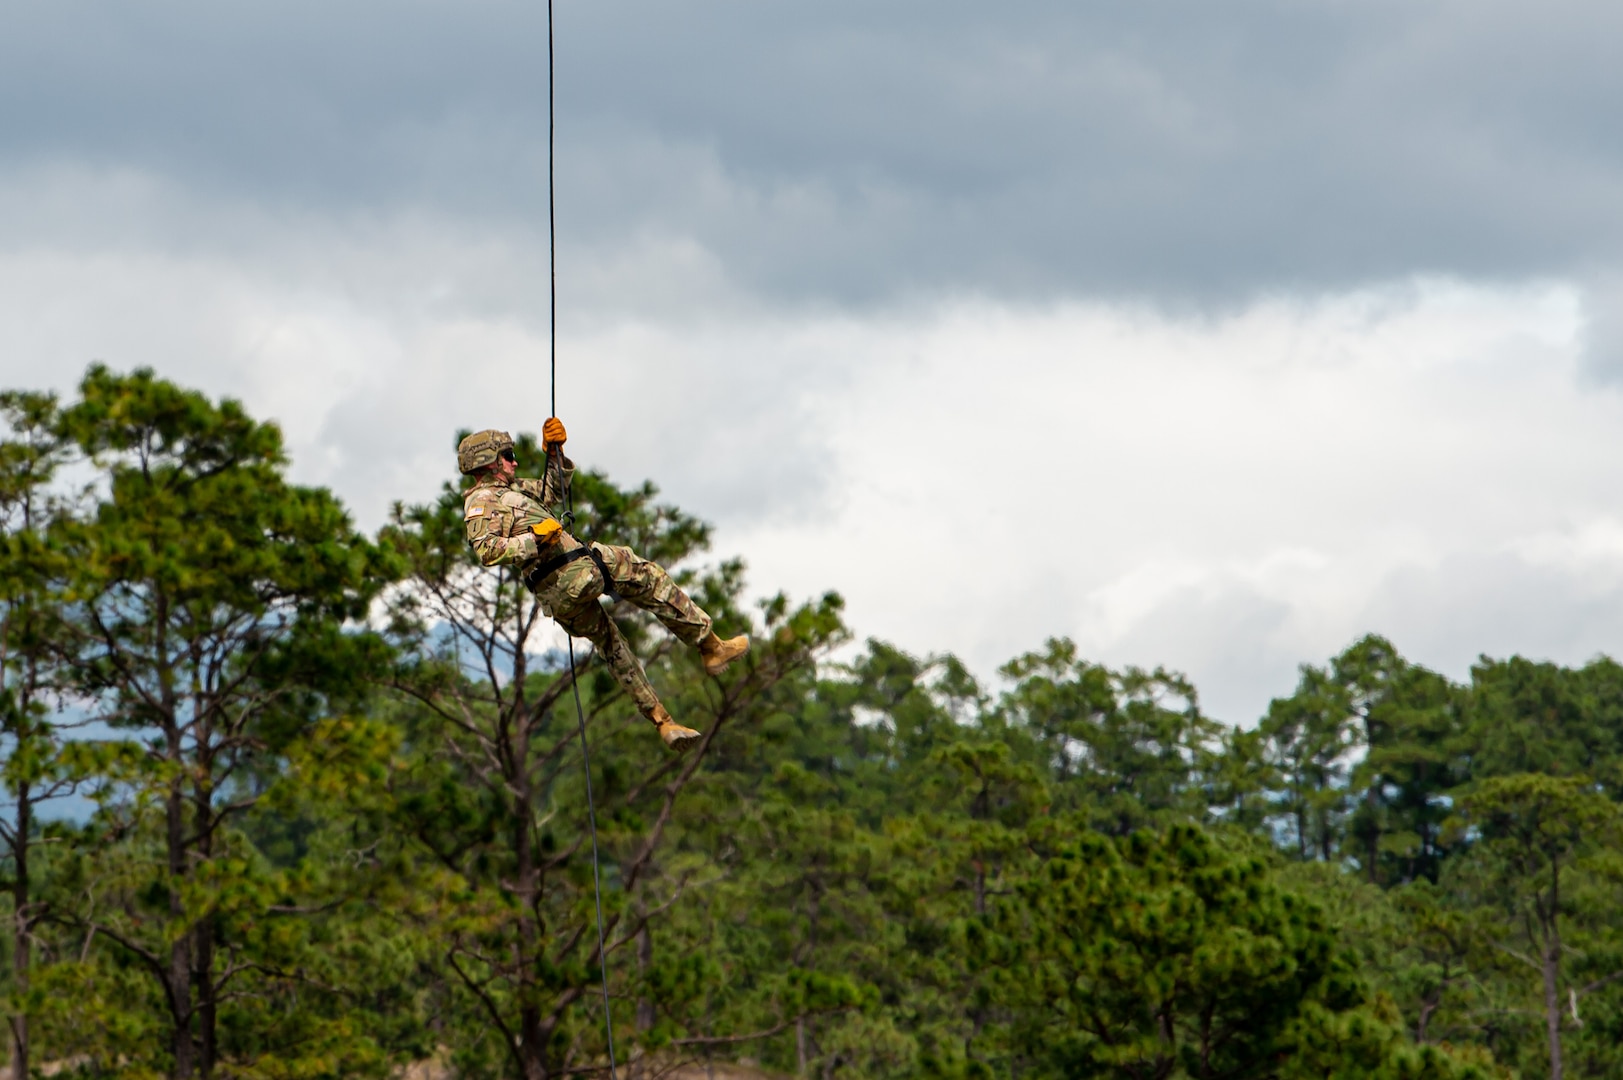 A Soldier from the Security Force Assistance Brigade (SFAB) Team 1231, Joint Task Force Bravo, rappels out of a CH-47 Chinook assigned to the 1st Battalion, 228th Aviation Regiment during an exercise near Soto Cano Air Base, Honduras, Nov. 24, 2021.